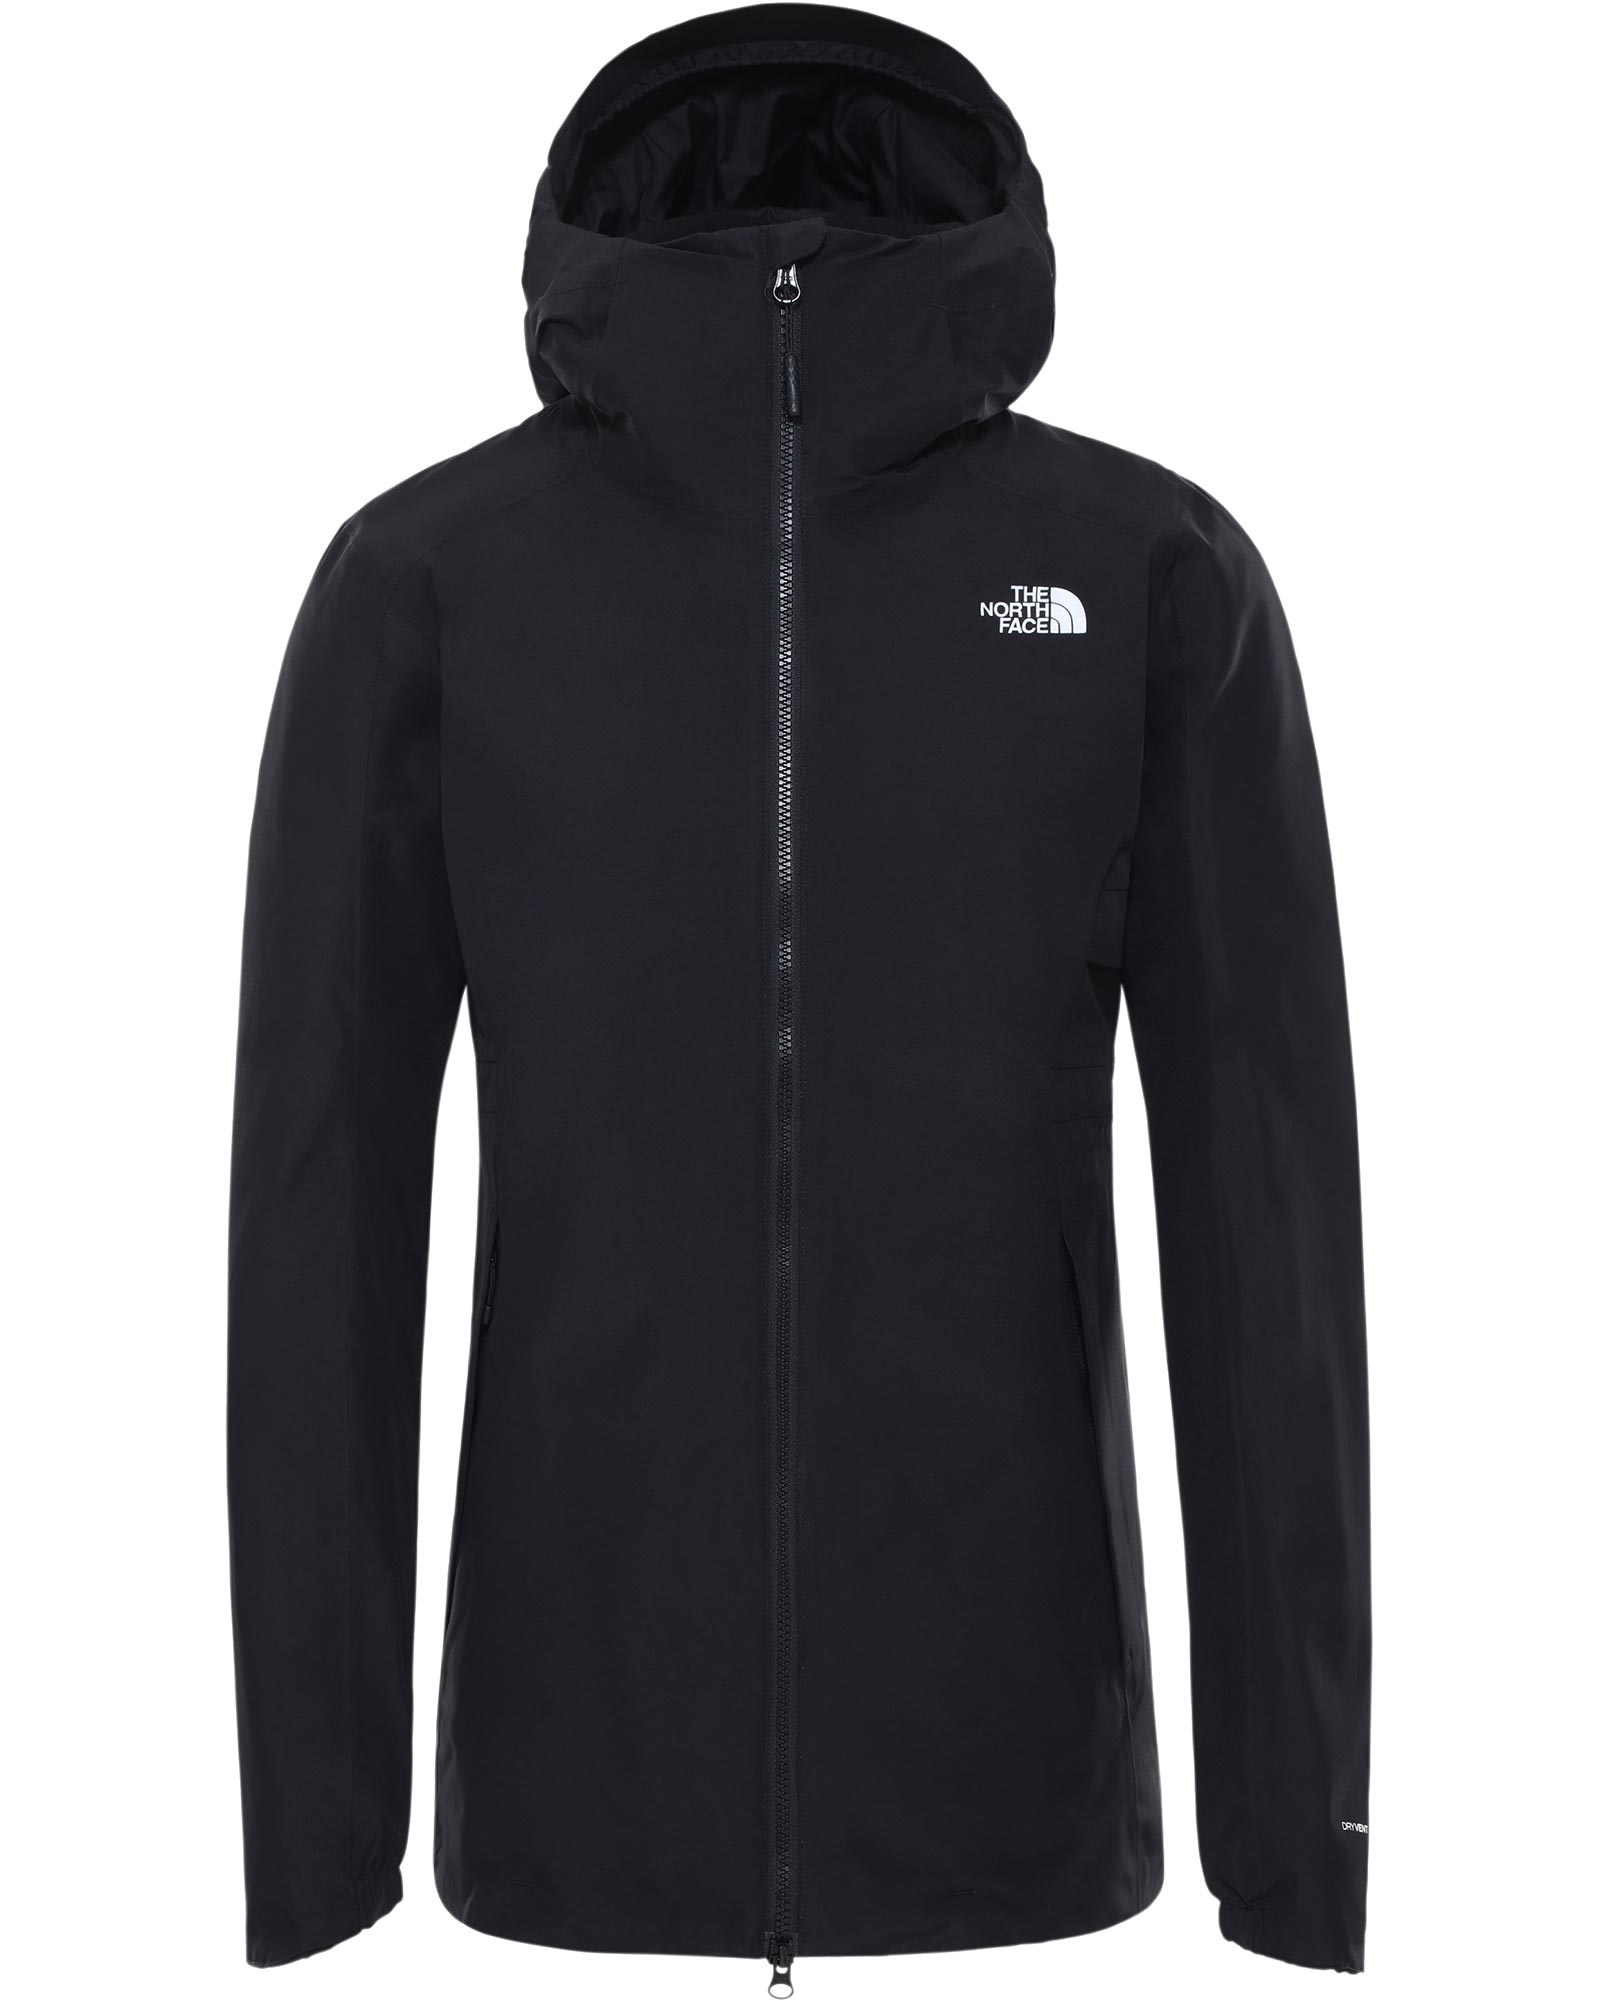 The North Face Hikesteller Women’s Insulated Parka Jacket - TNF Black S